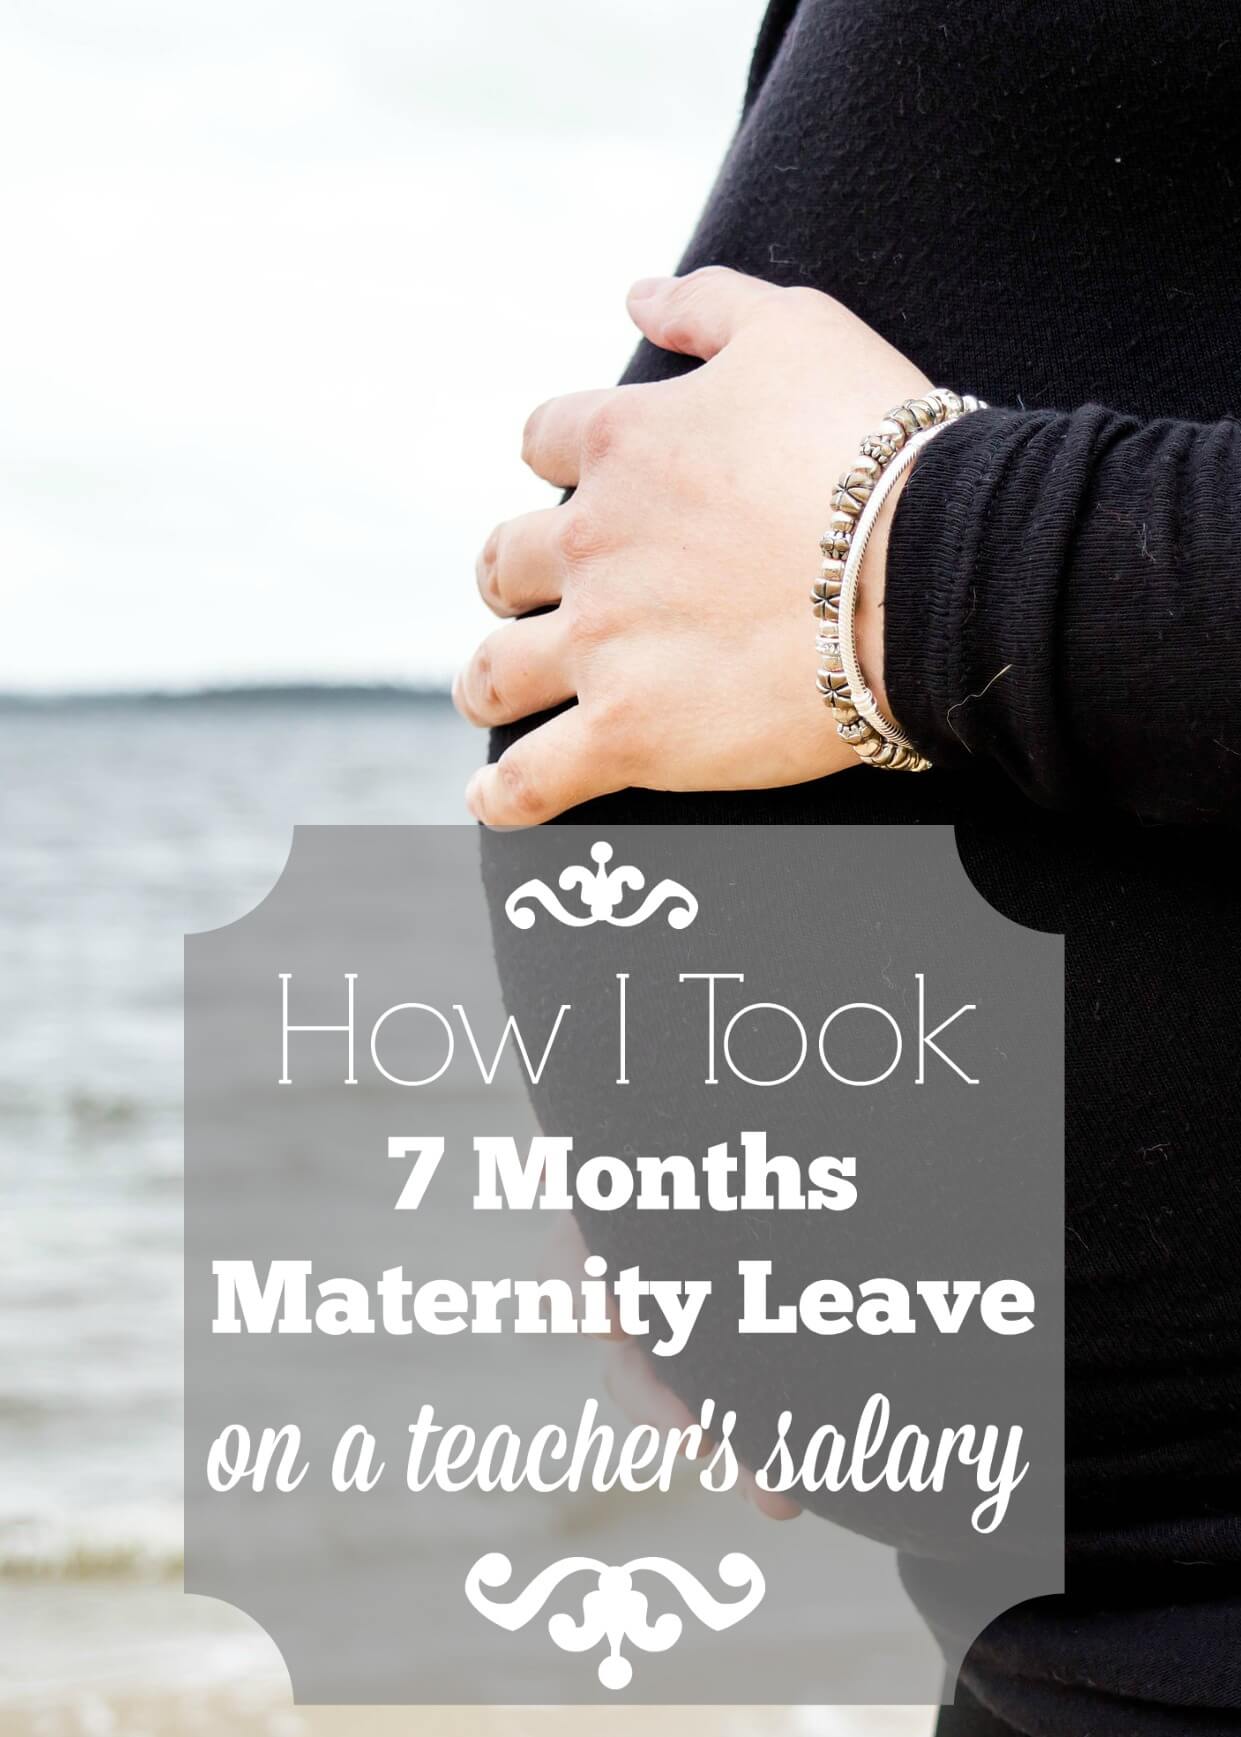 For working parents, taking time to be with your newborn can be next to impossible. Here's how I managed to take a 7 month maternity leave on a teacher's salary.